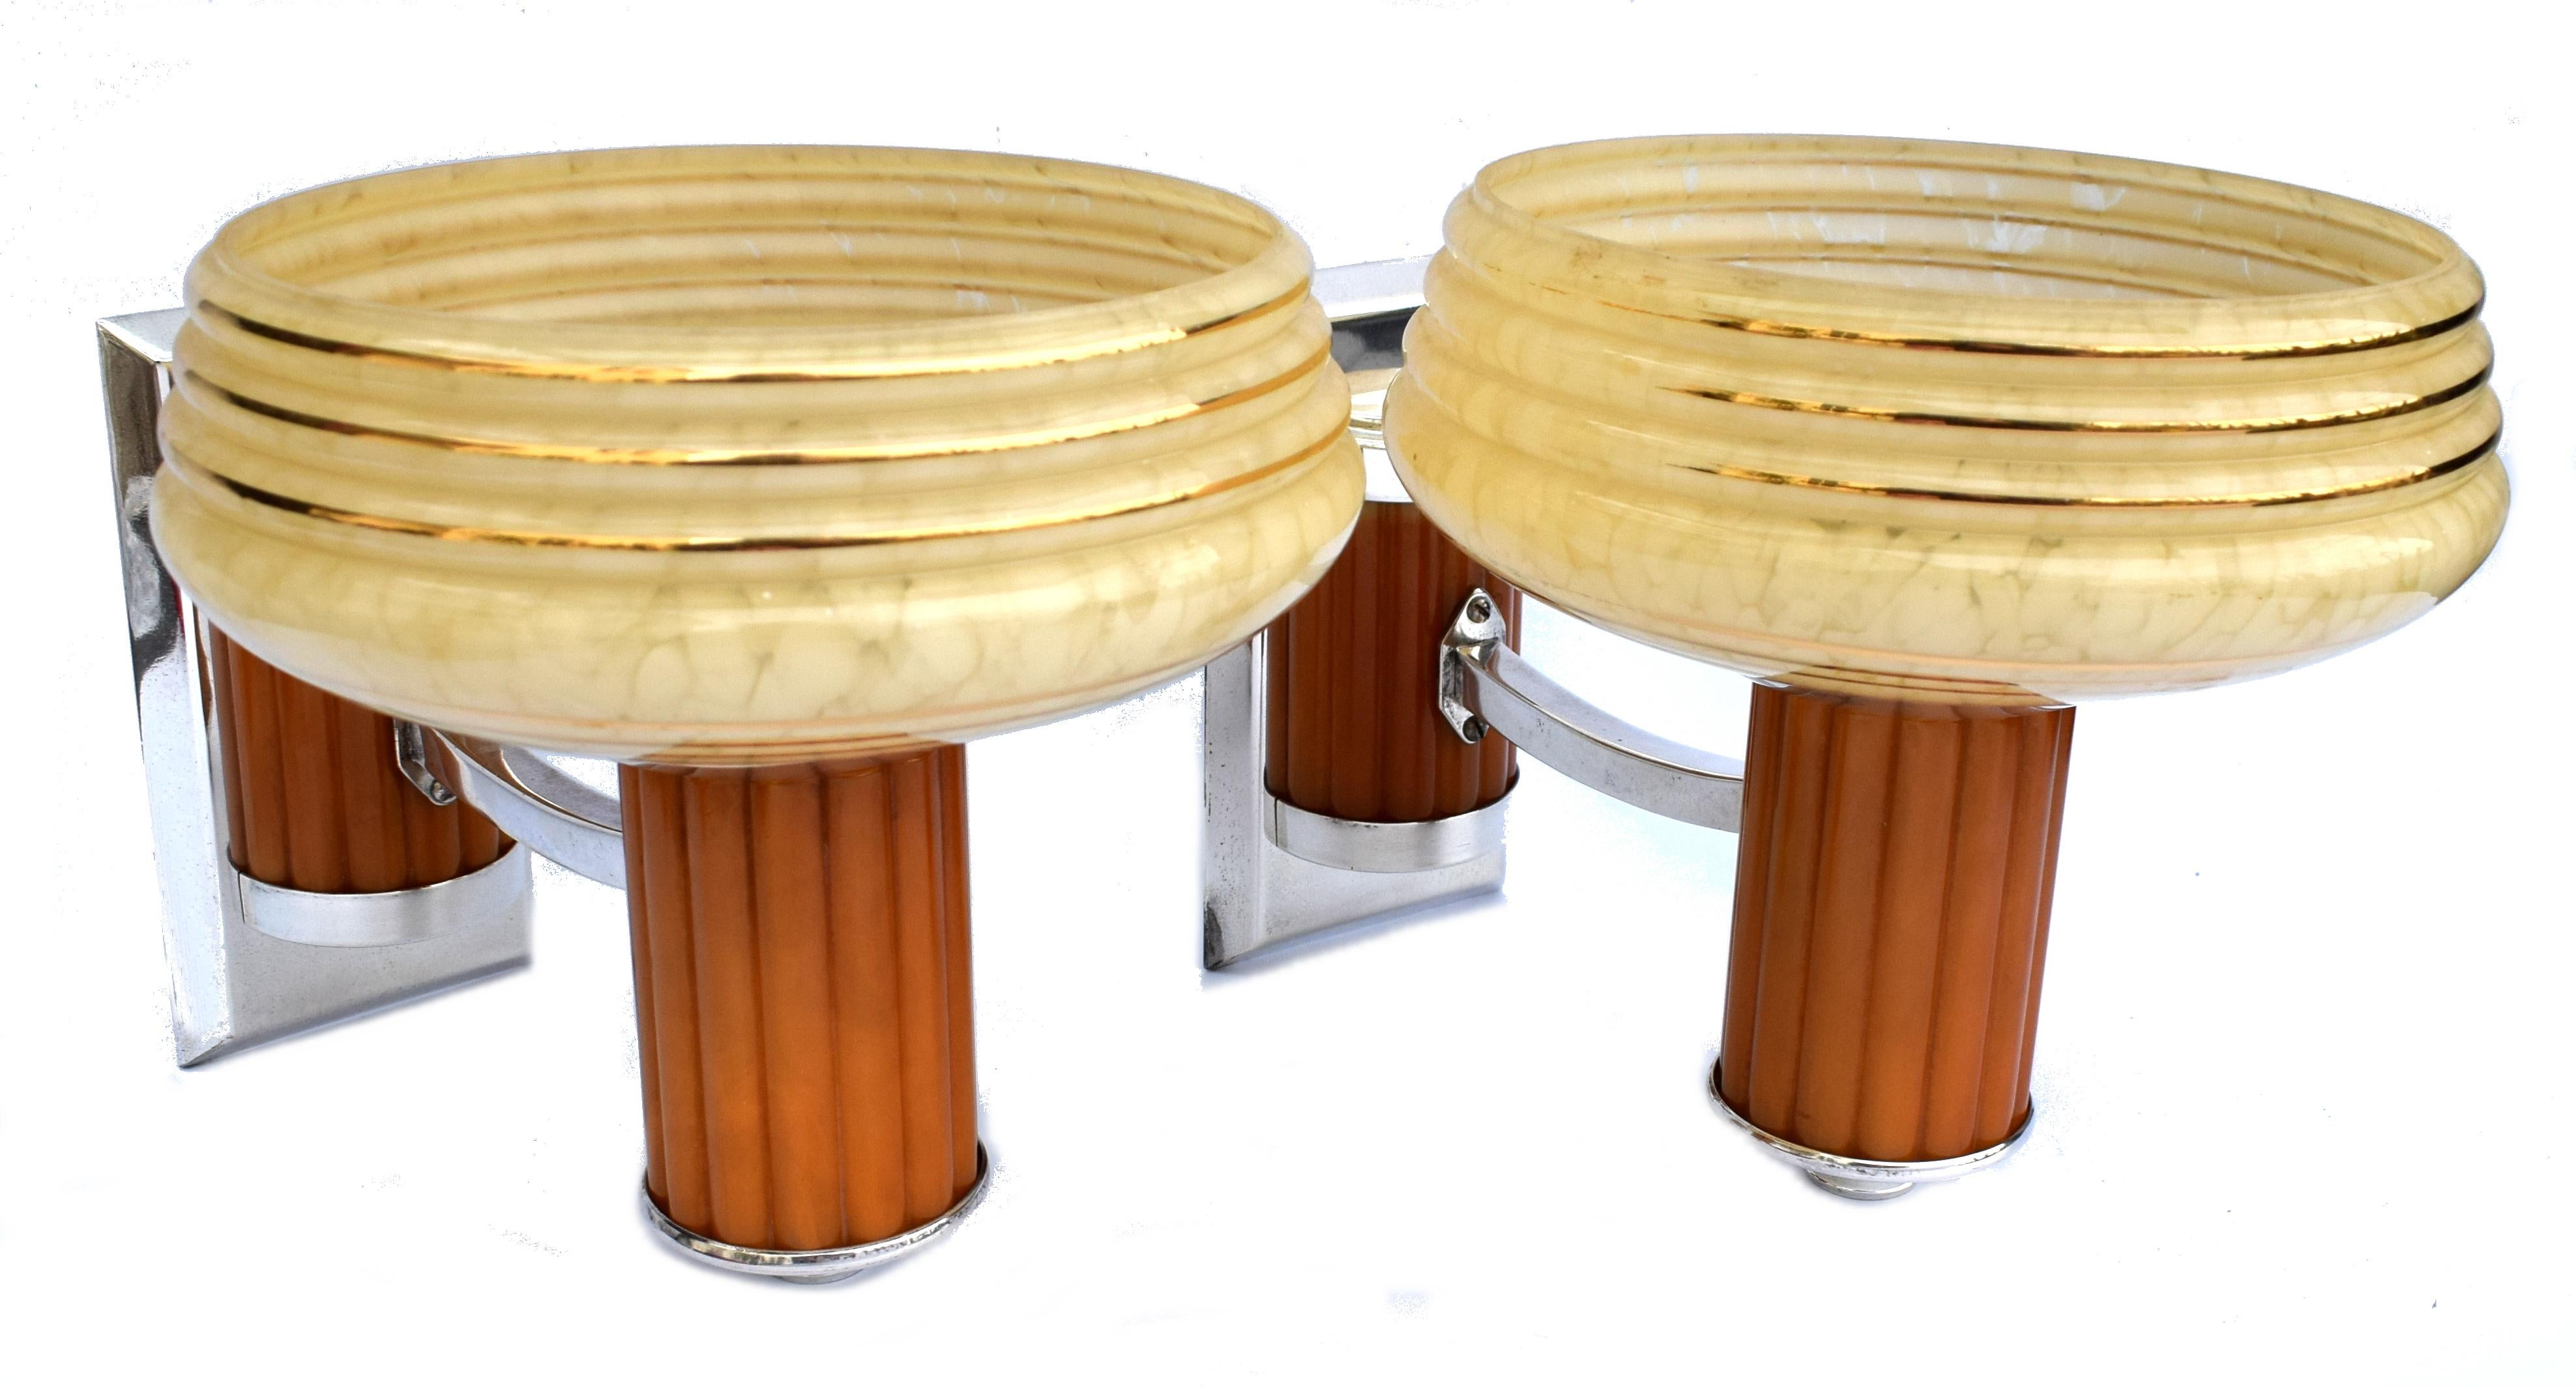 A very rare chance to acquire a pair of matching Art Deco wall light sconces. Made from butterscotch colored catalin/phenolic Bakelite and copper metal-ware with mottled glass yellow colored shades. These lights make a great statement to any room